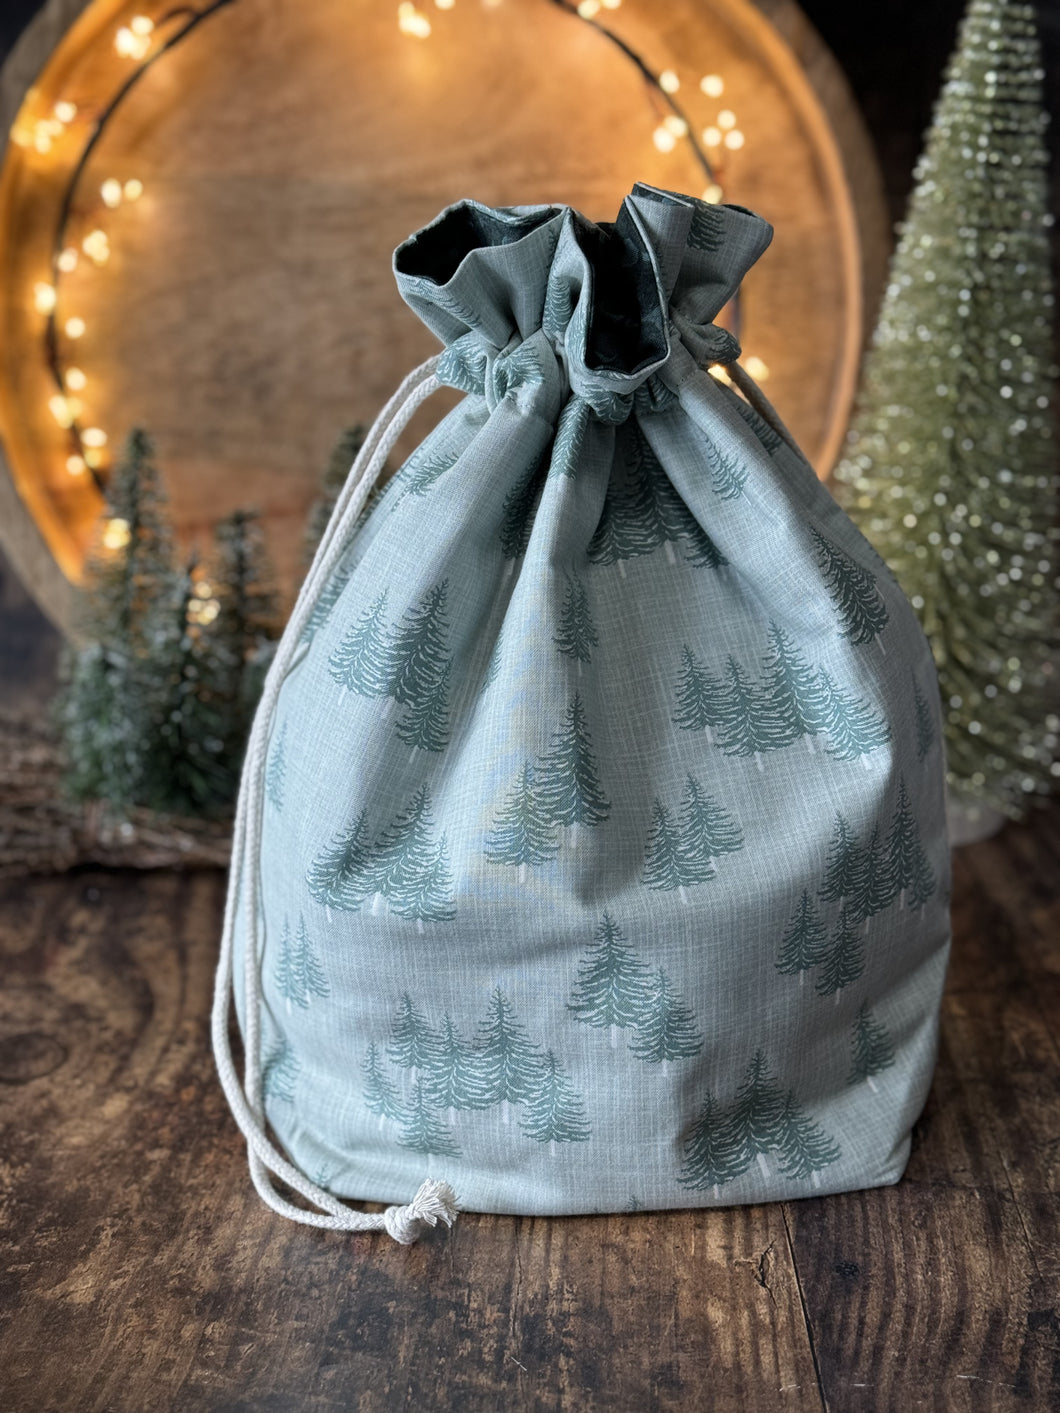 Ruffle Bag - Large - Snowy Forest